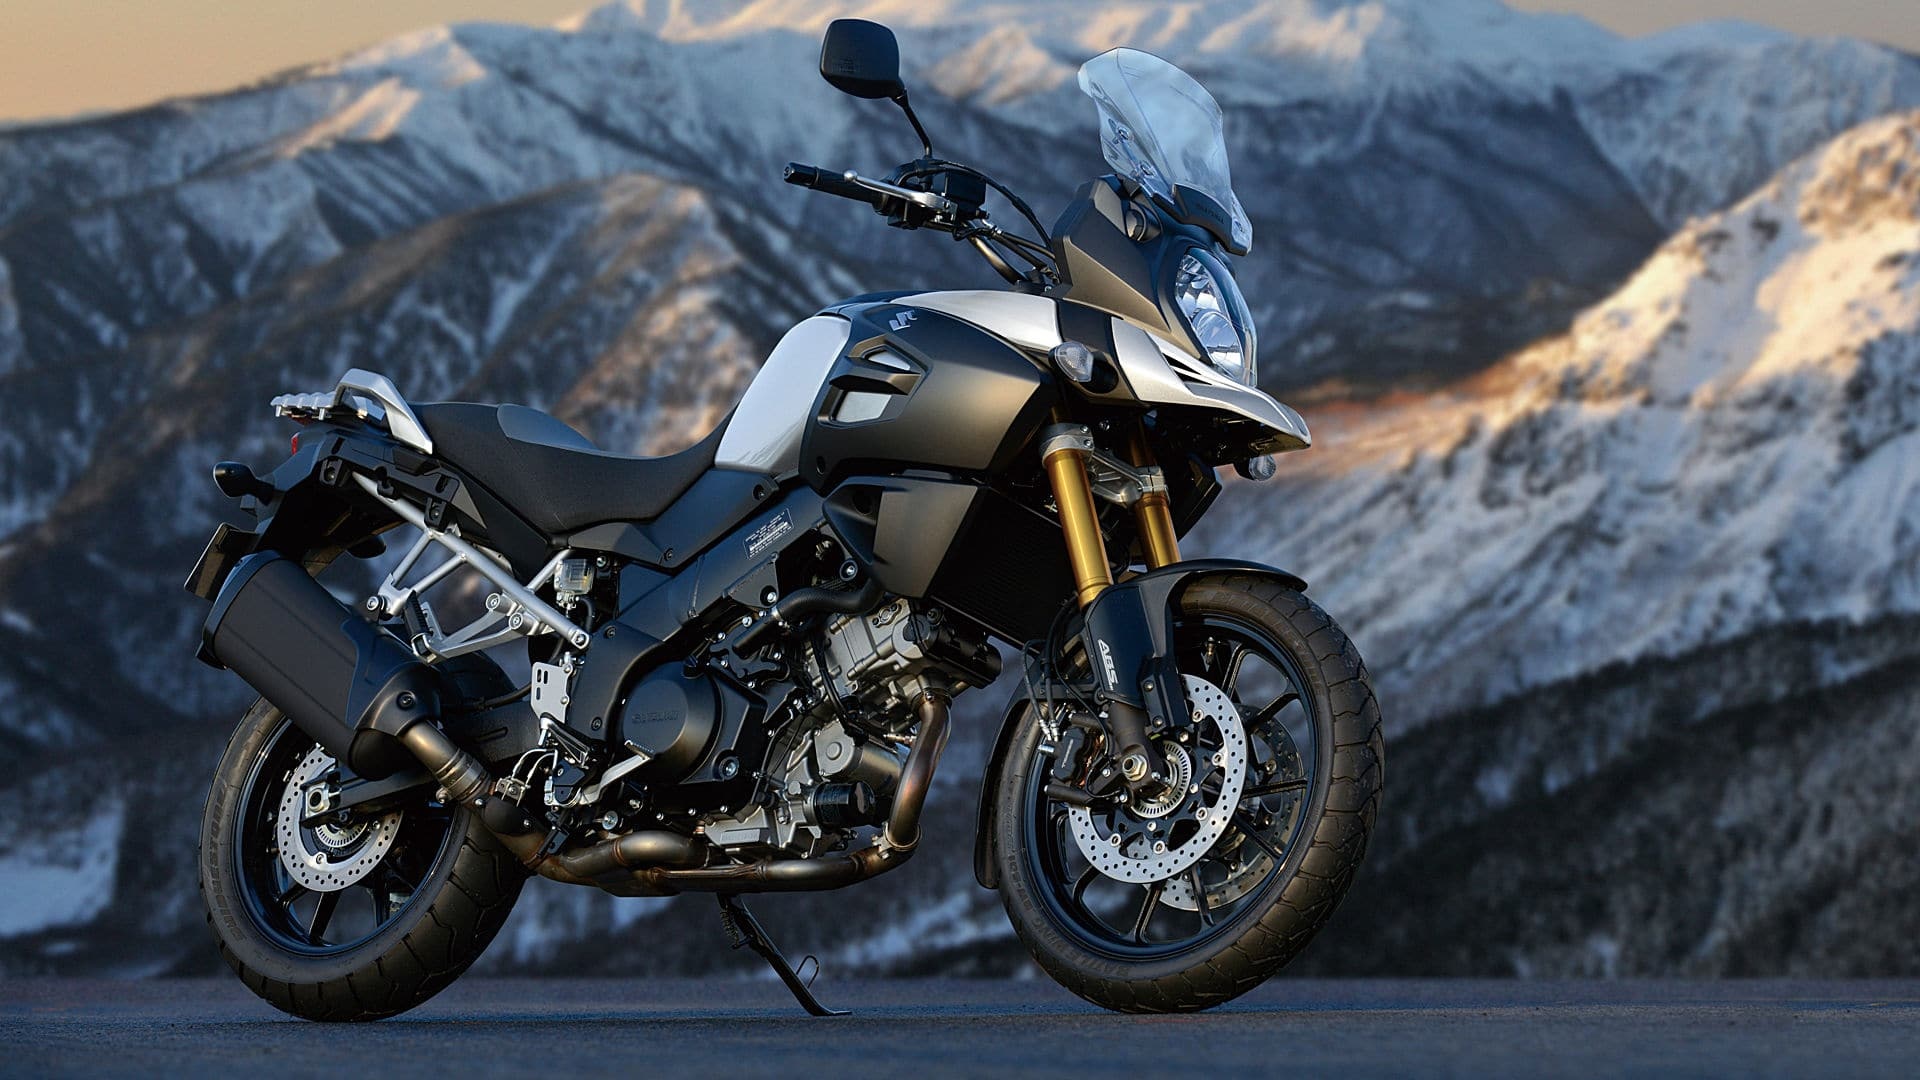 Suzuki V-Strom 650, Impressive wallpapers, Exciting adventure, Motorcycle imagery, 1920x1080 Full HD Desktop